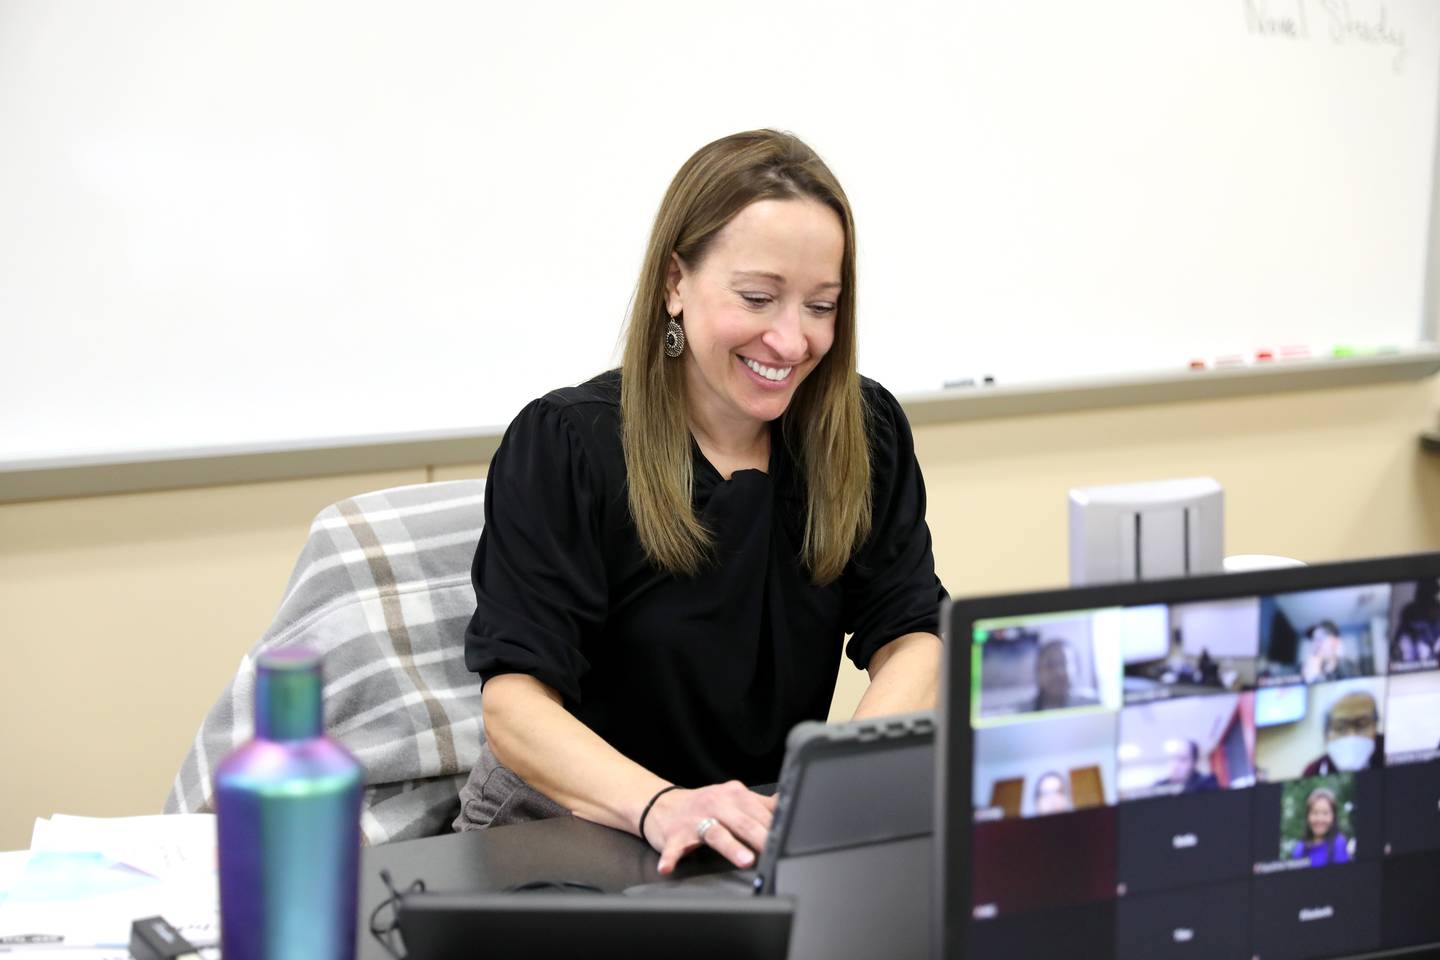 Heather Engelhart, an instructor in Waubonsee Community College’s Adult Education Division at the Aurora campus, works with students both in person and online.